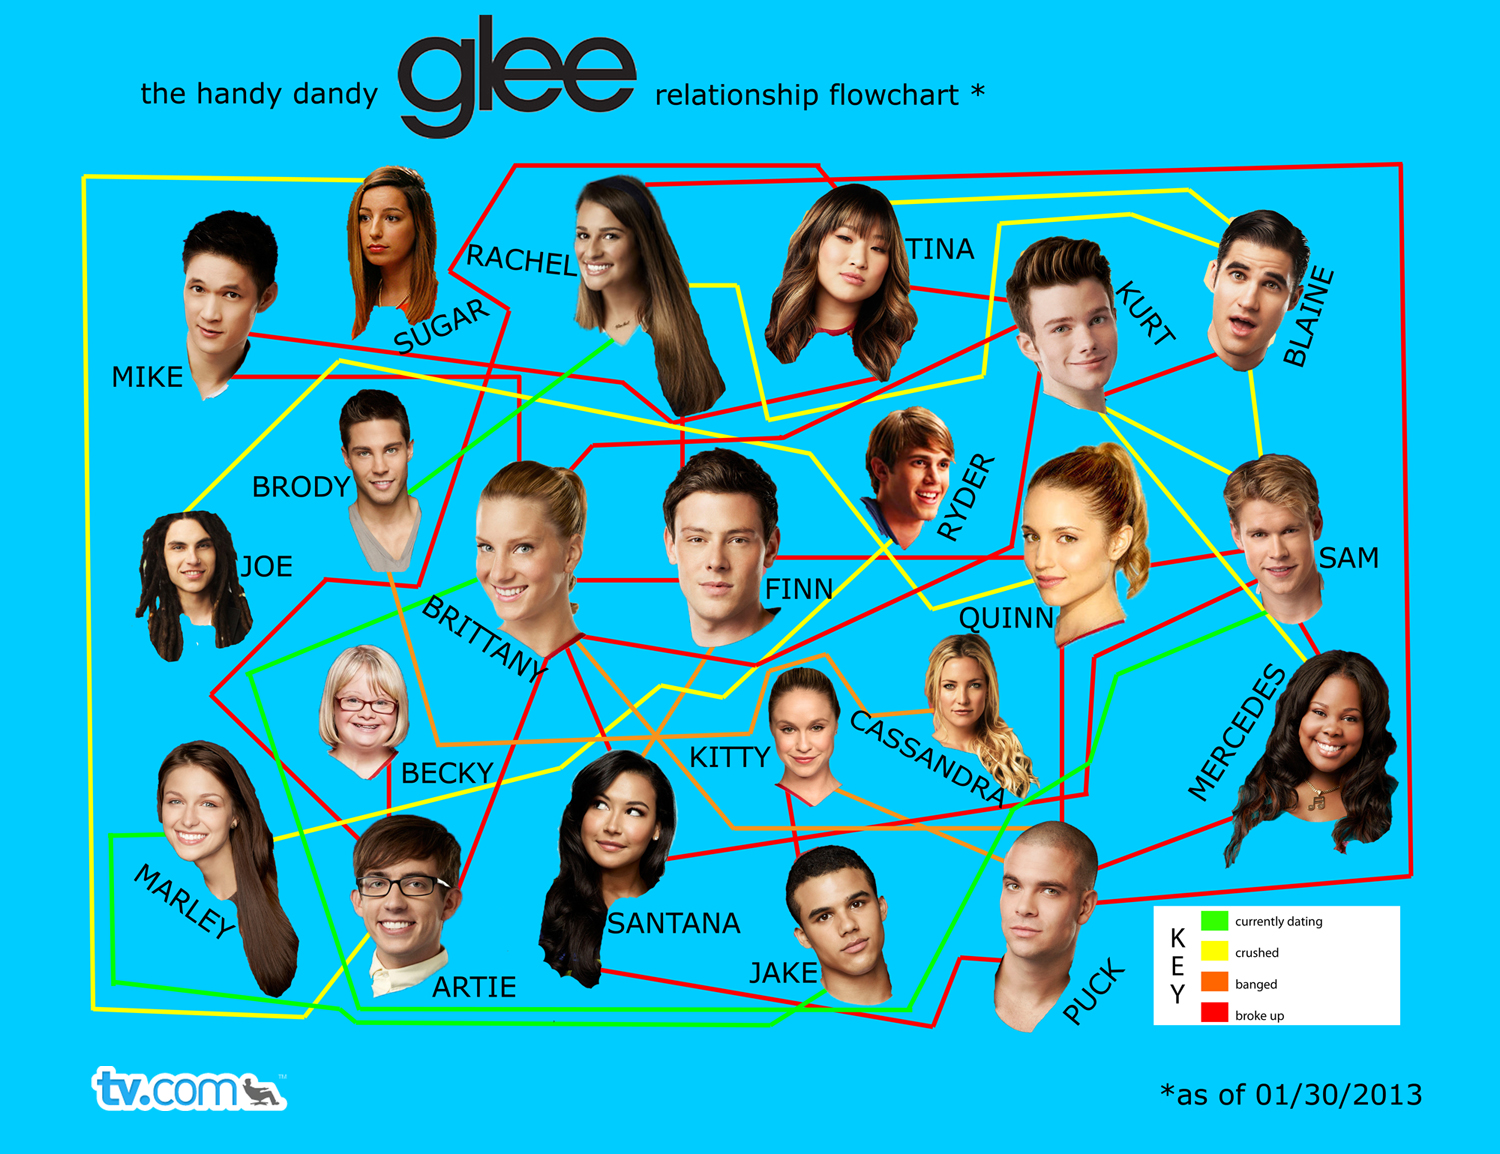 Glee Wallpapers Tv Show Hq Glee Pictures 4k Wallpapers 19